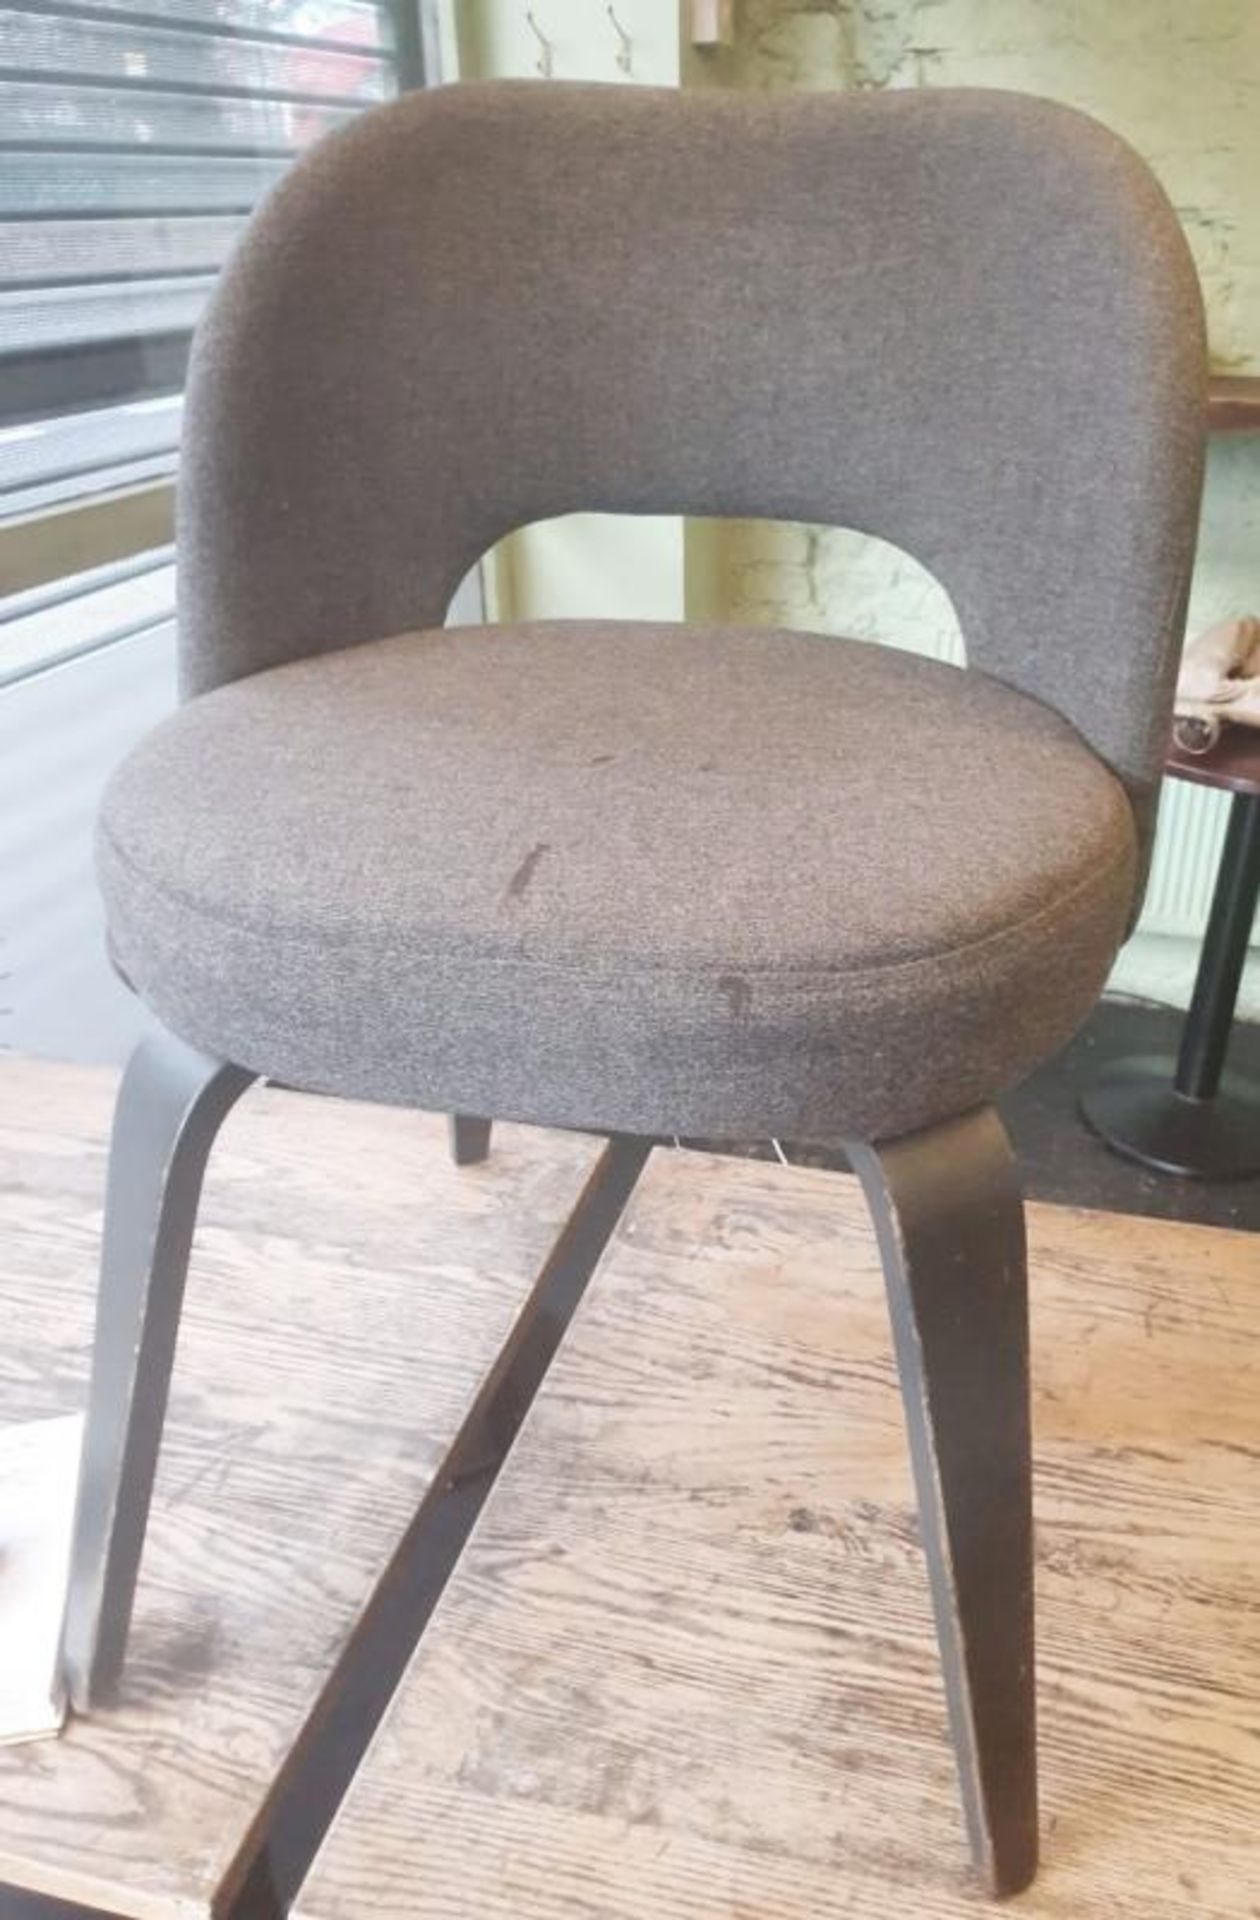 1 x Stylish Chair Upholstered In A Light Grey Fabric - Recently Taken From A Contemporary Caribbean - Image 3 of 6